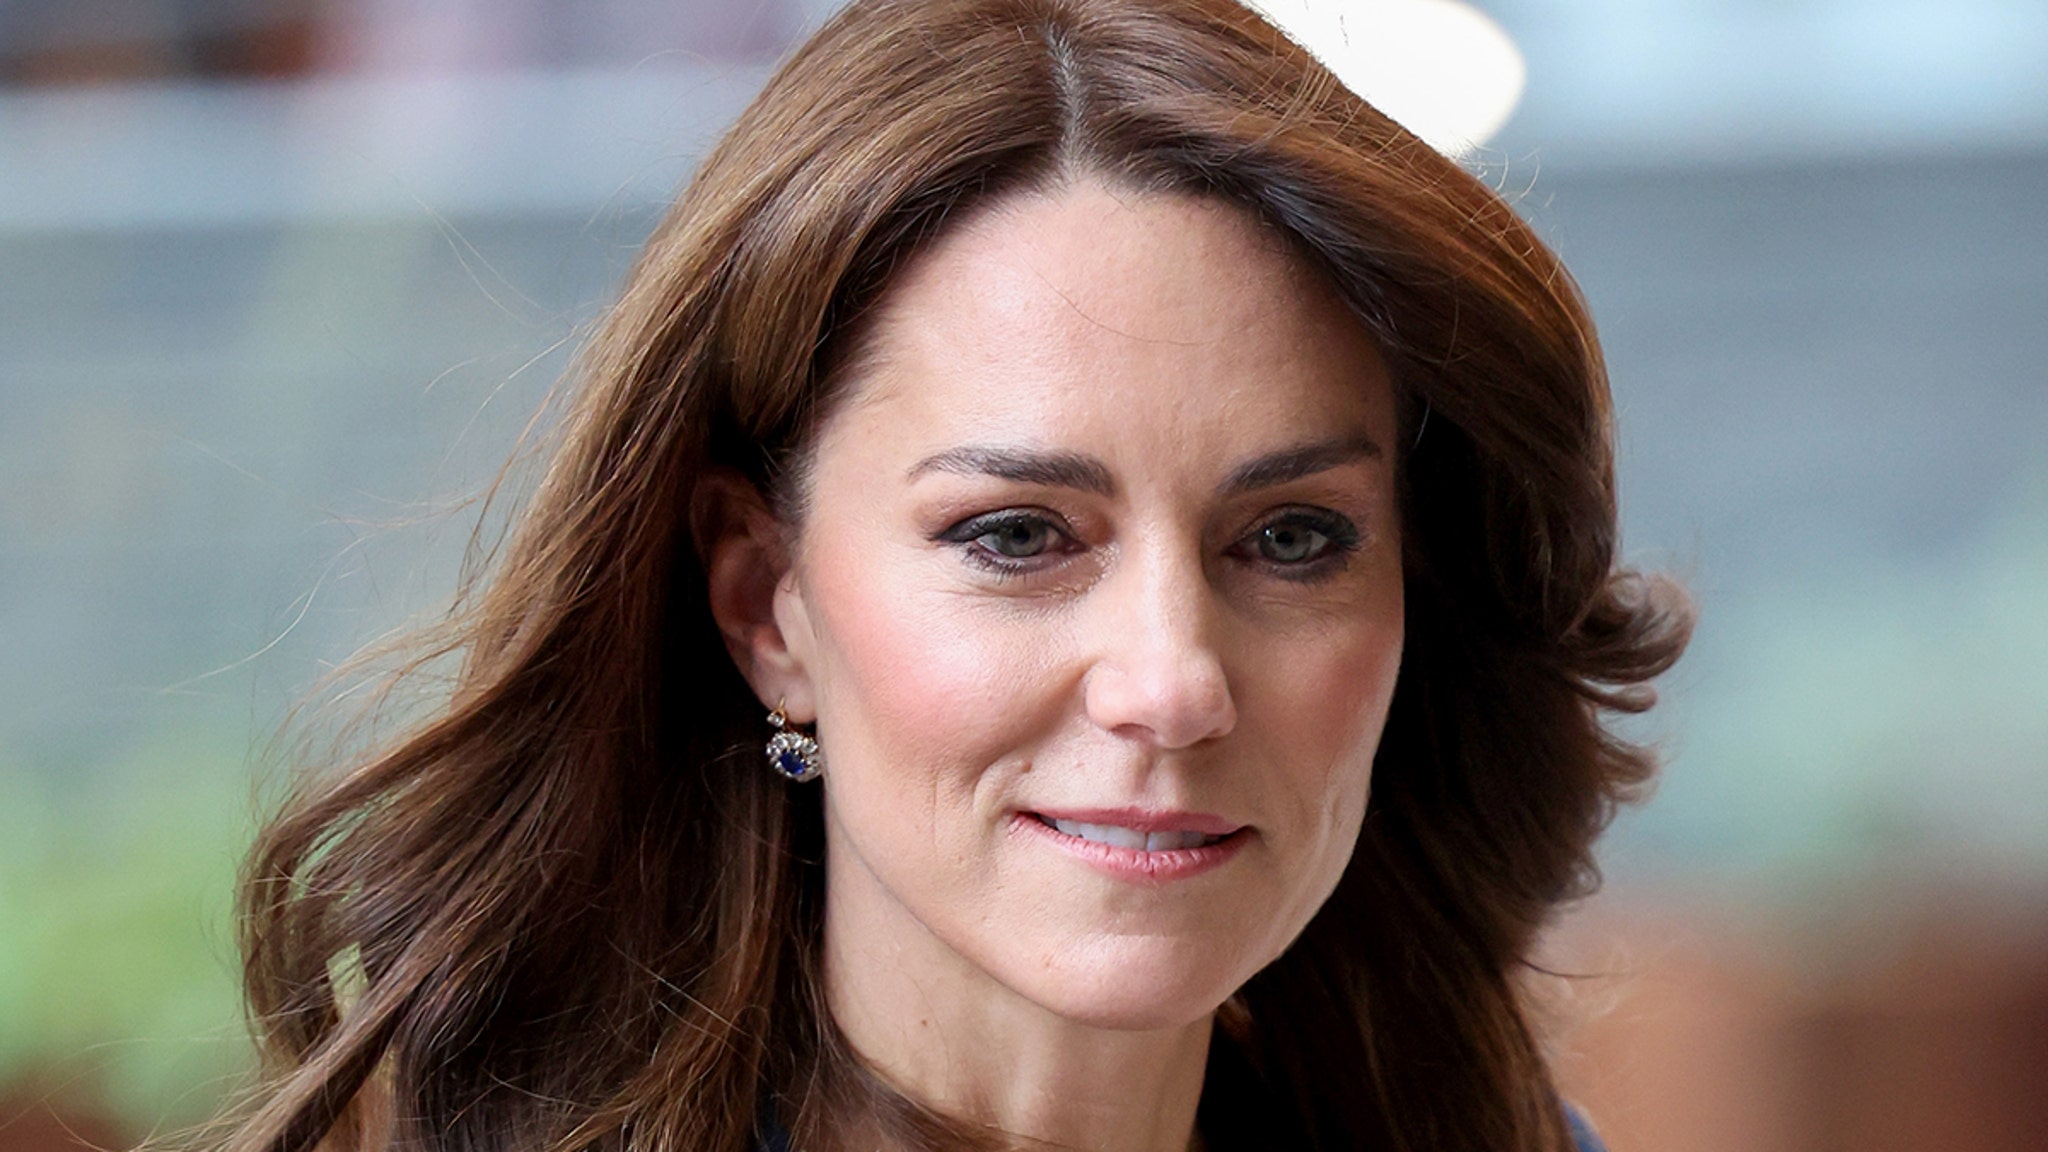 Kate Middleton Cancer Treatment Going Well, Planning Return to Public